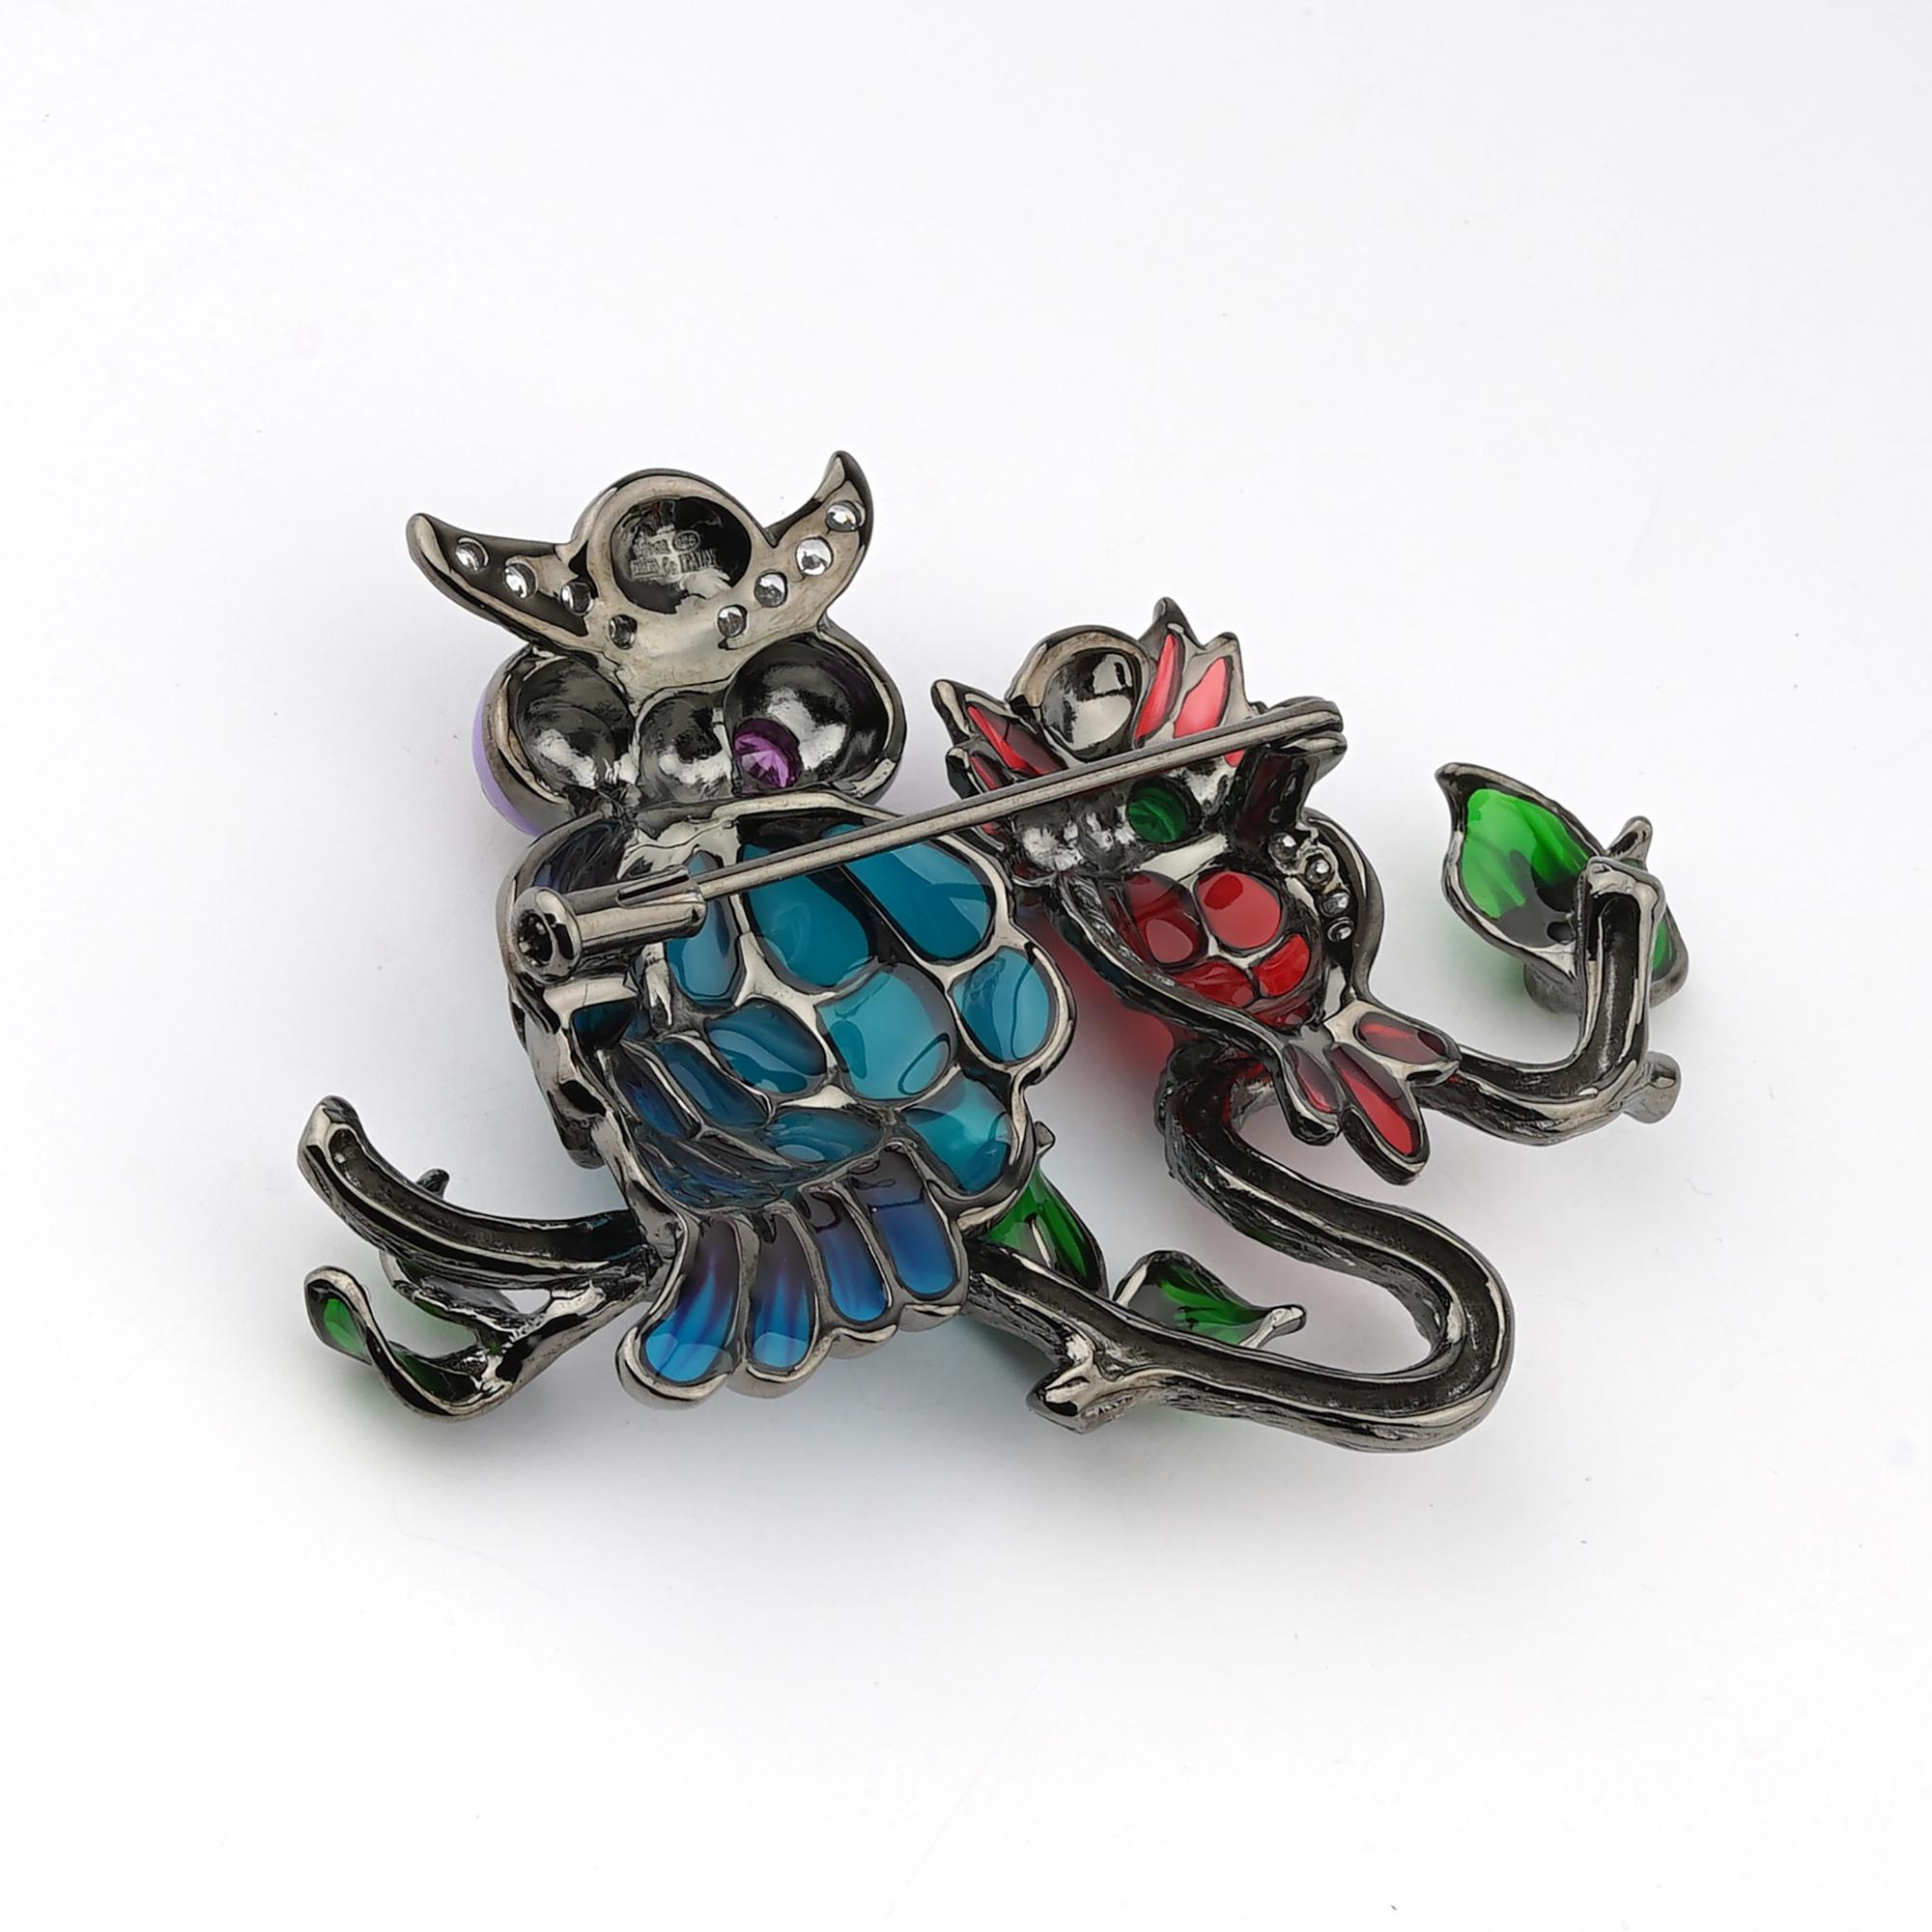 Mixed Cut Black Rhodium-Plated 925 Sterling Silver with Enamels Owls Shaped Brooch